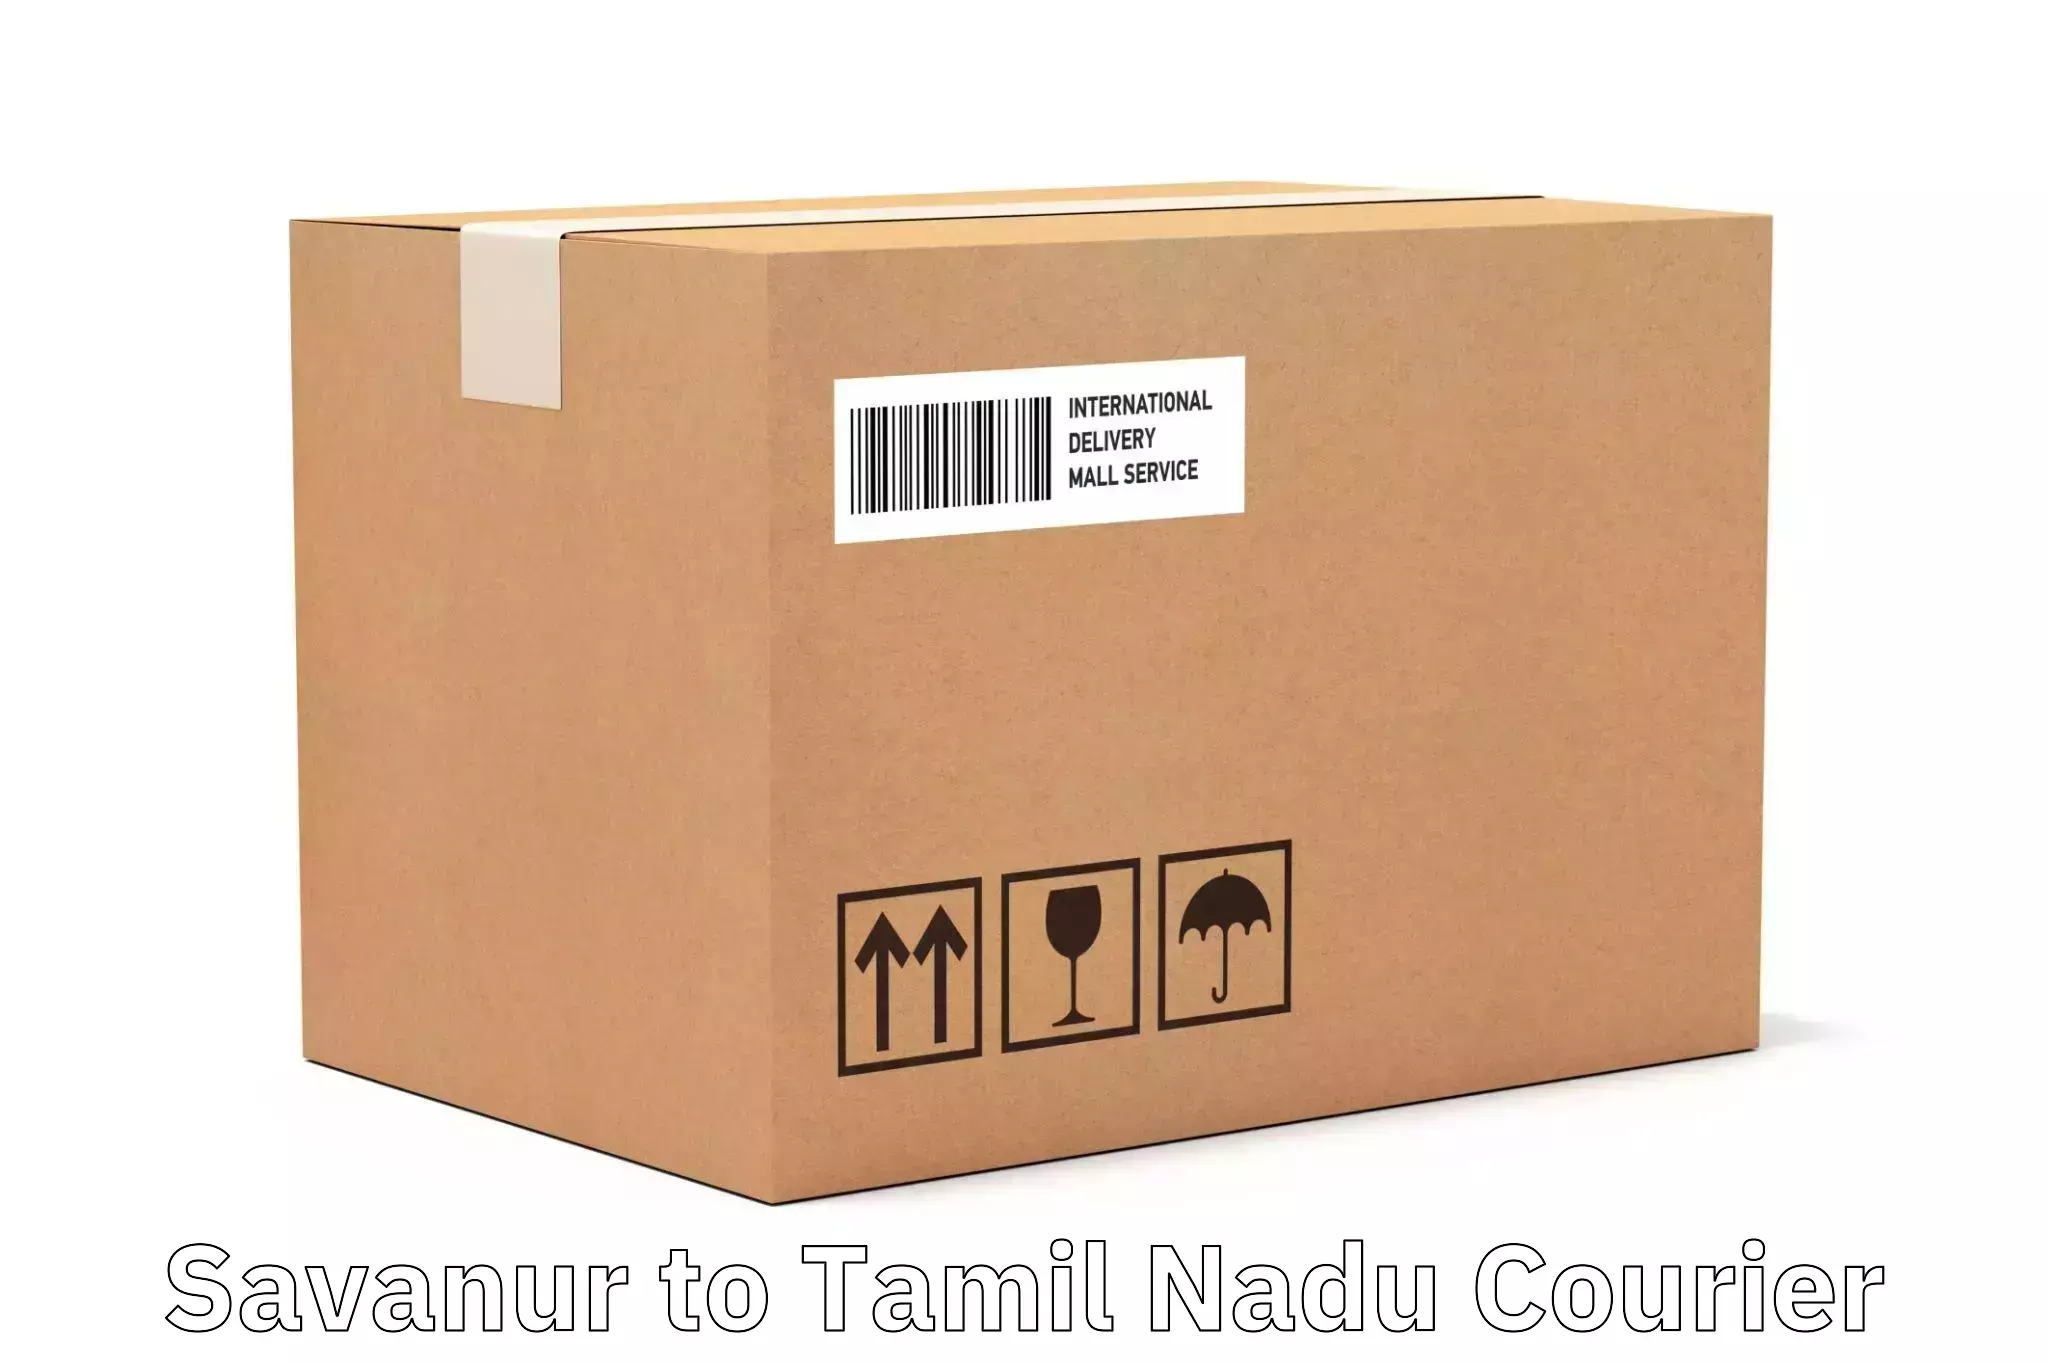 Express delivery capabilities Savanur to Ambur